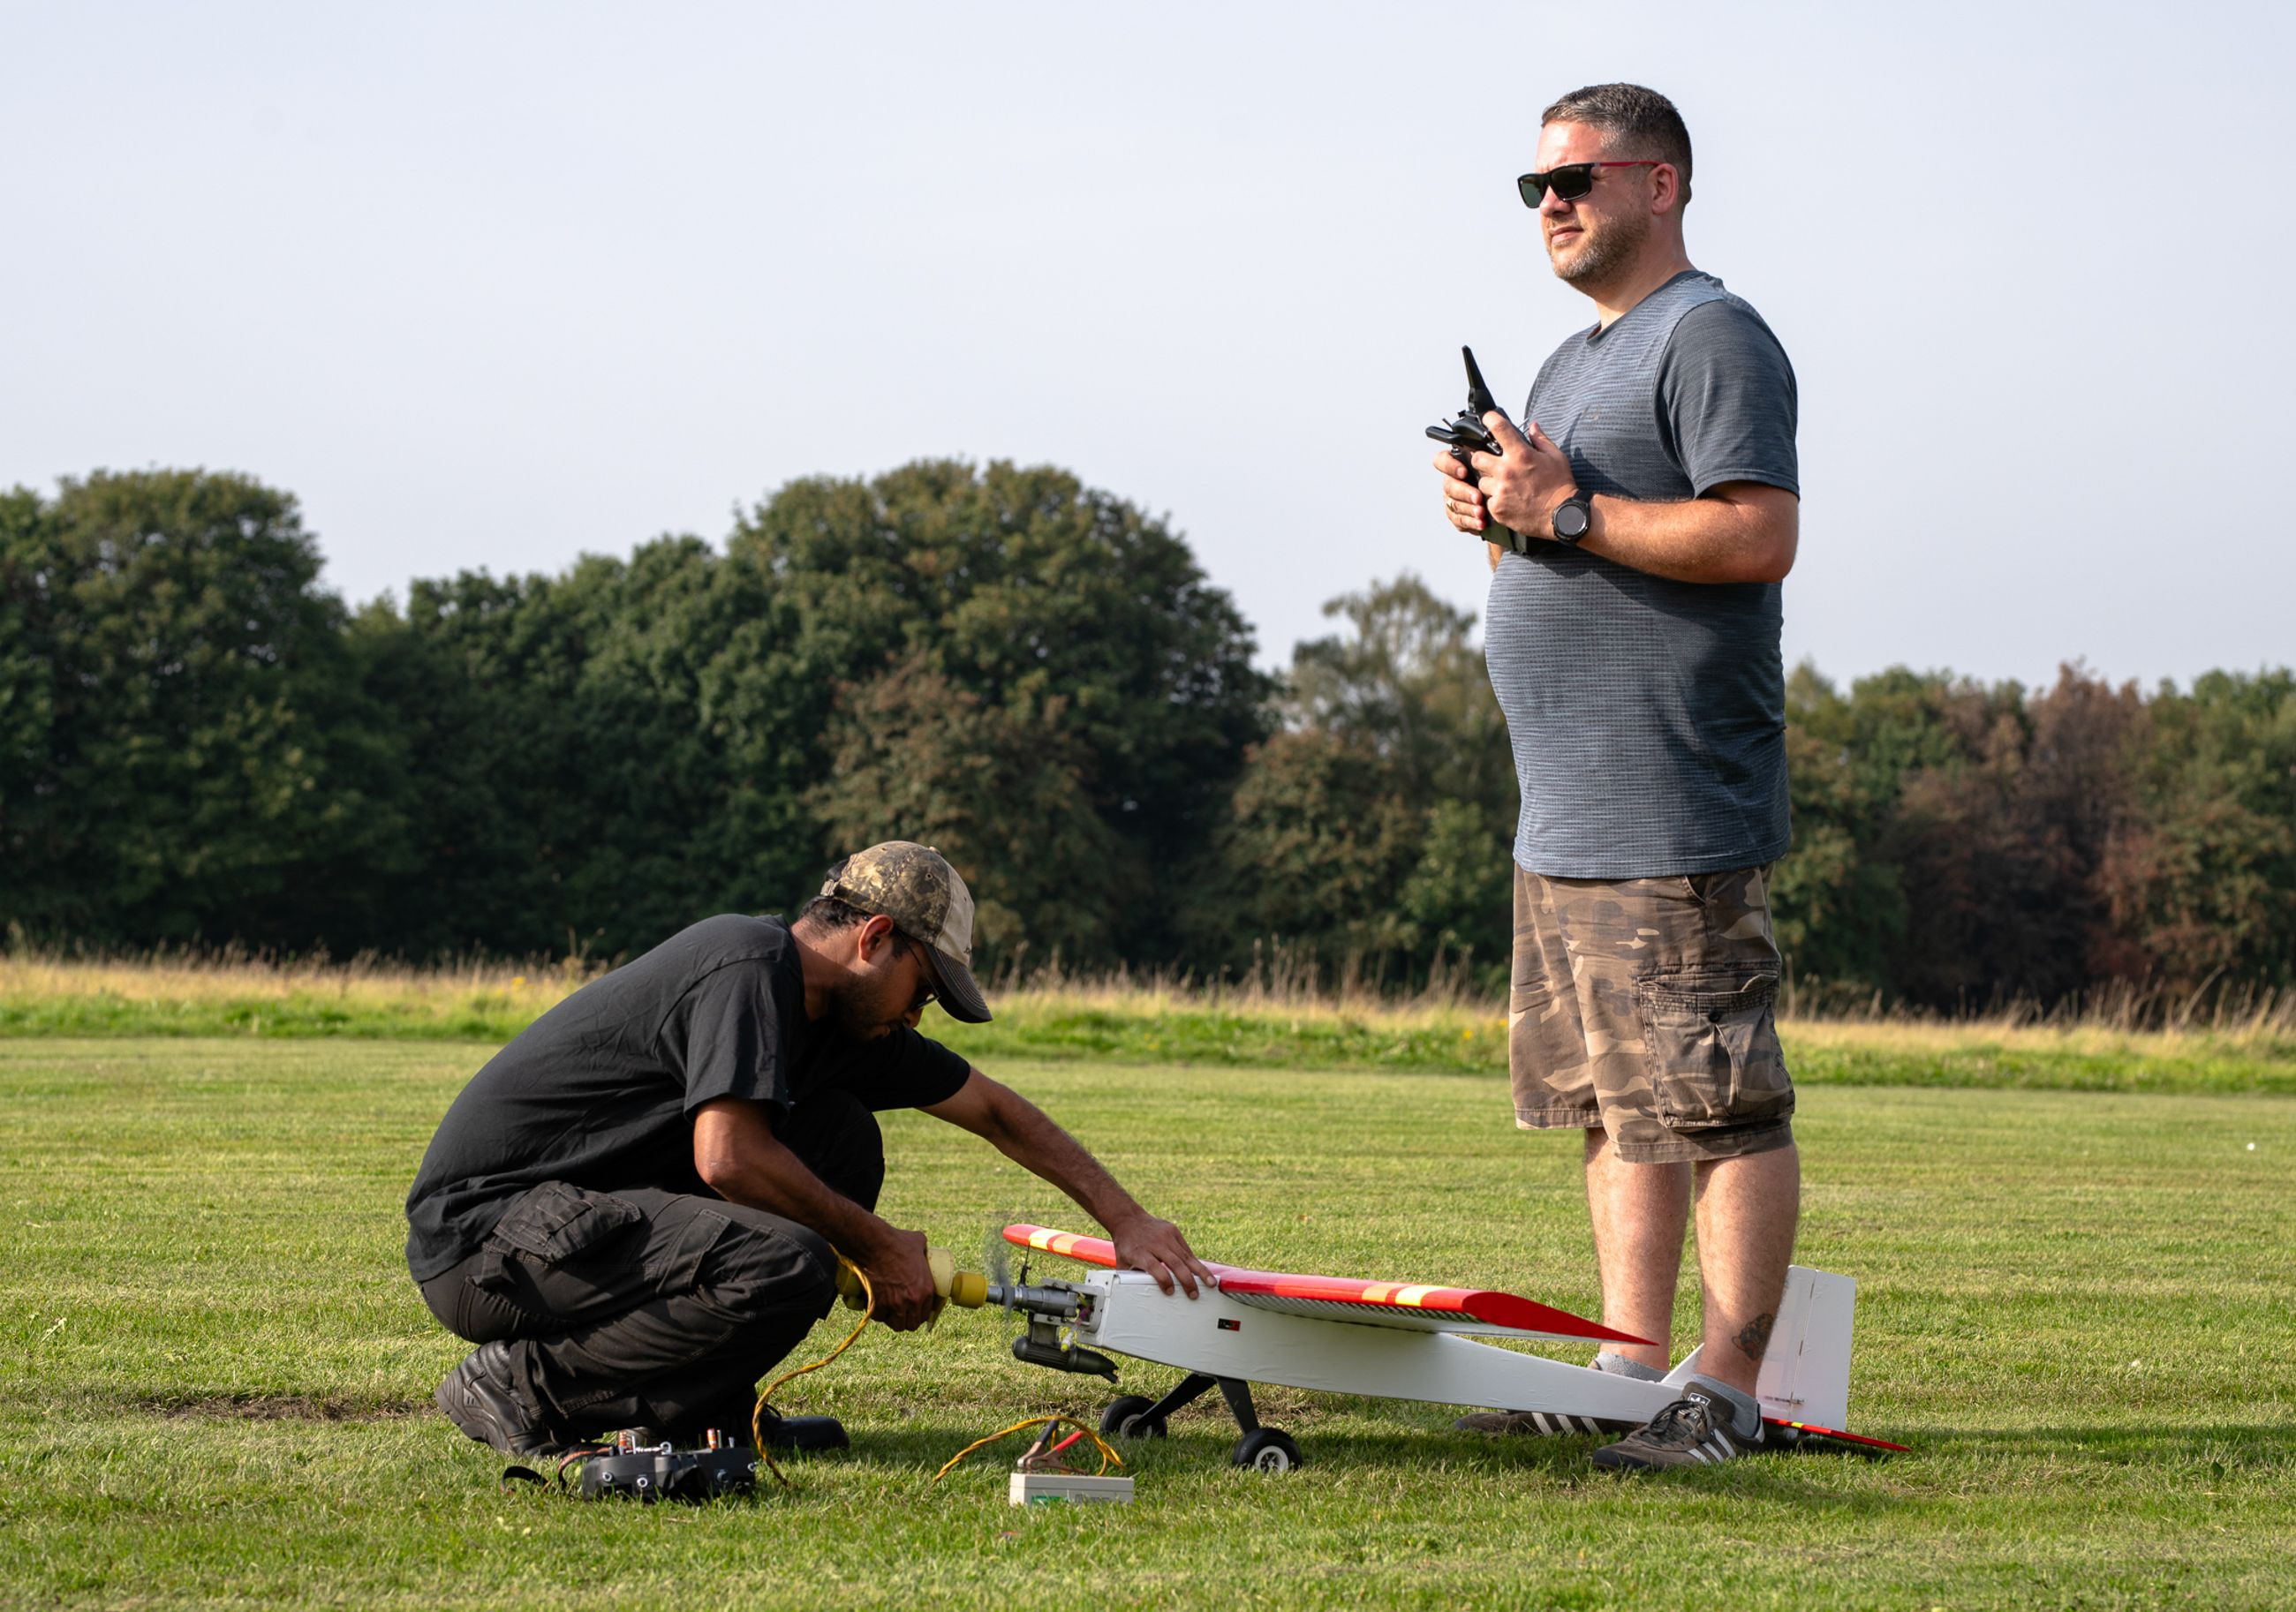 two people starting and RC plane engine